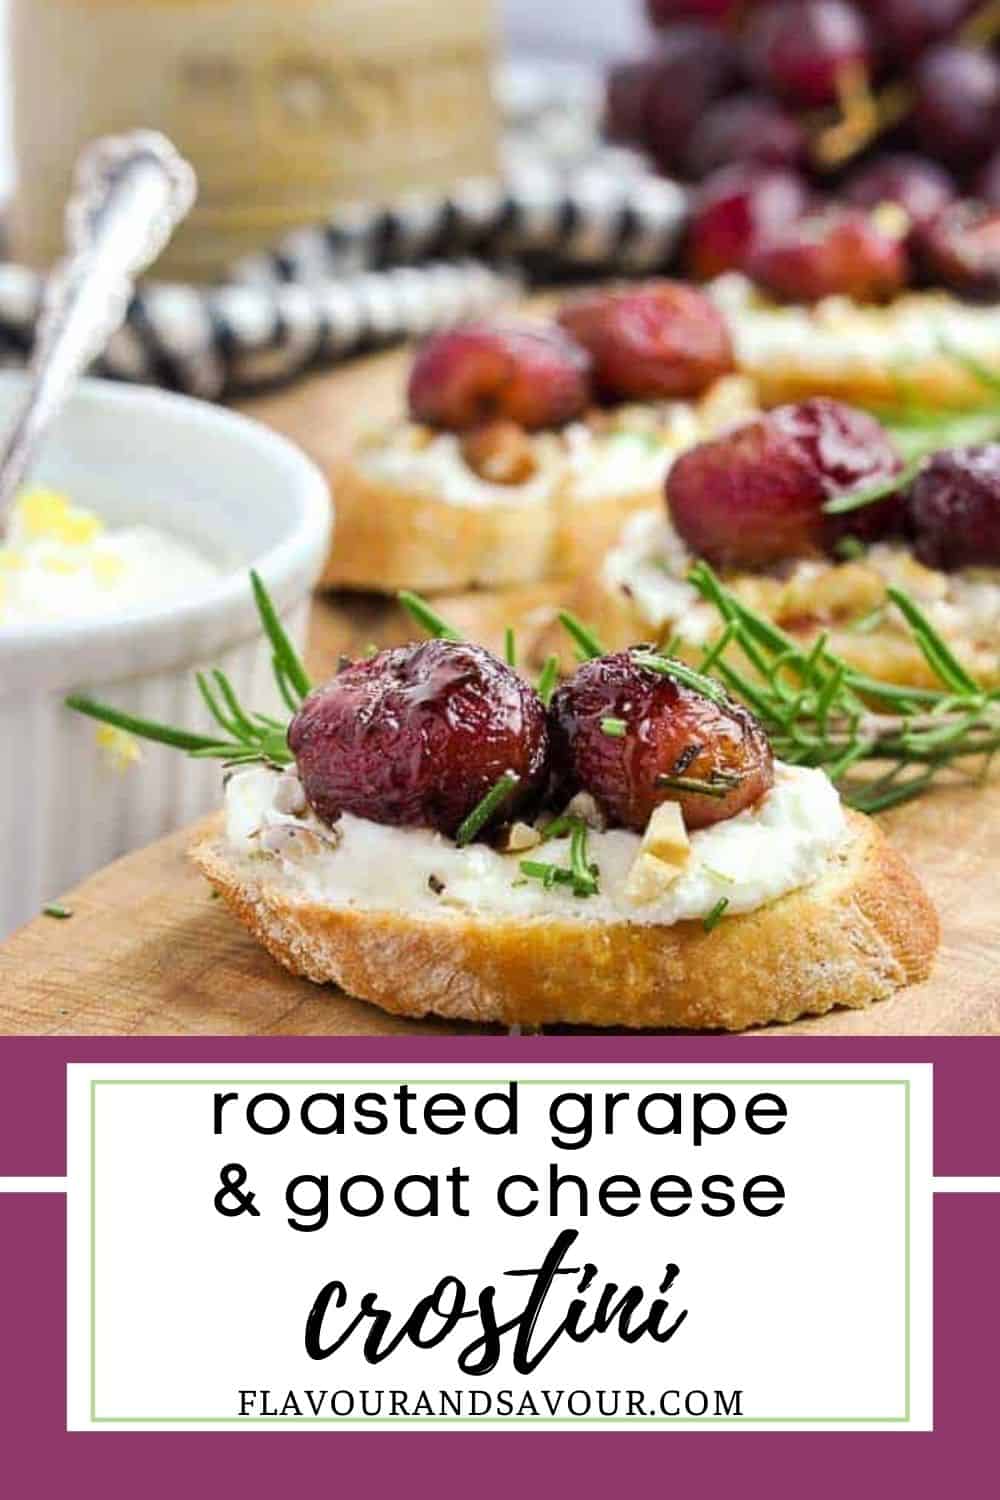 Roasted Grape and Goat Cheese Crostini image with text overlay